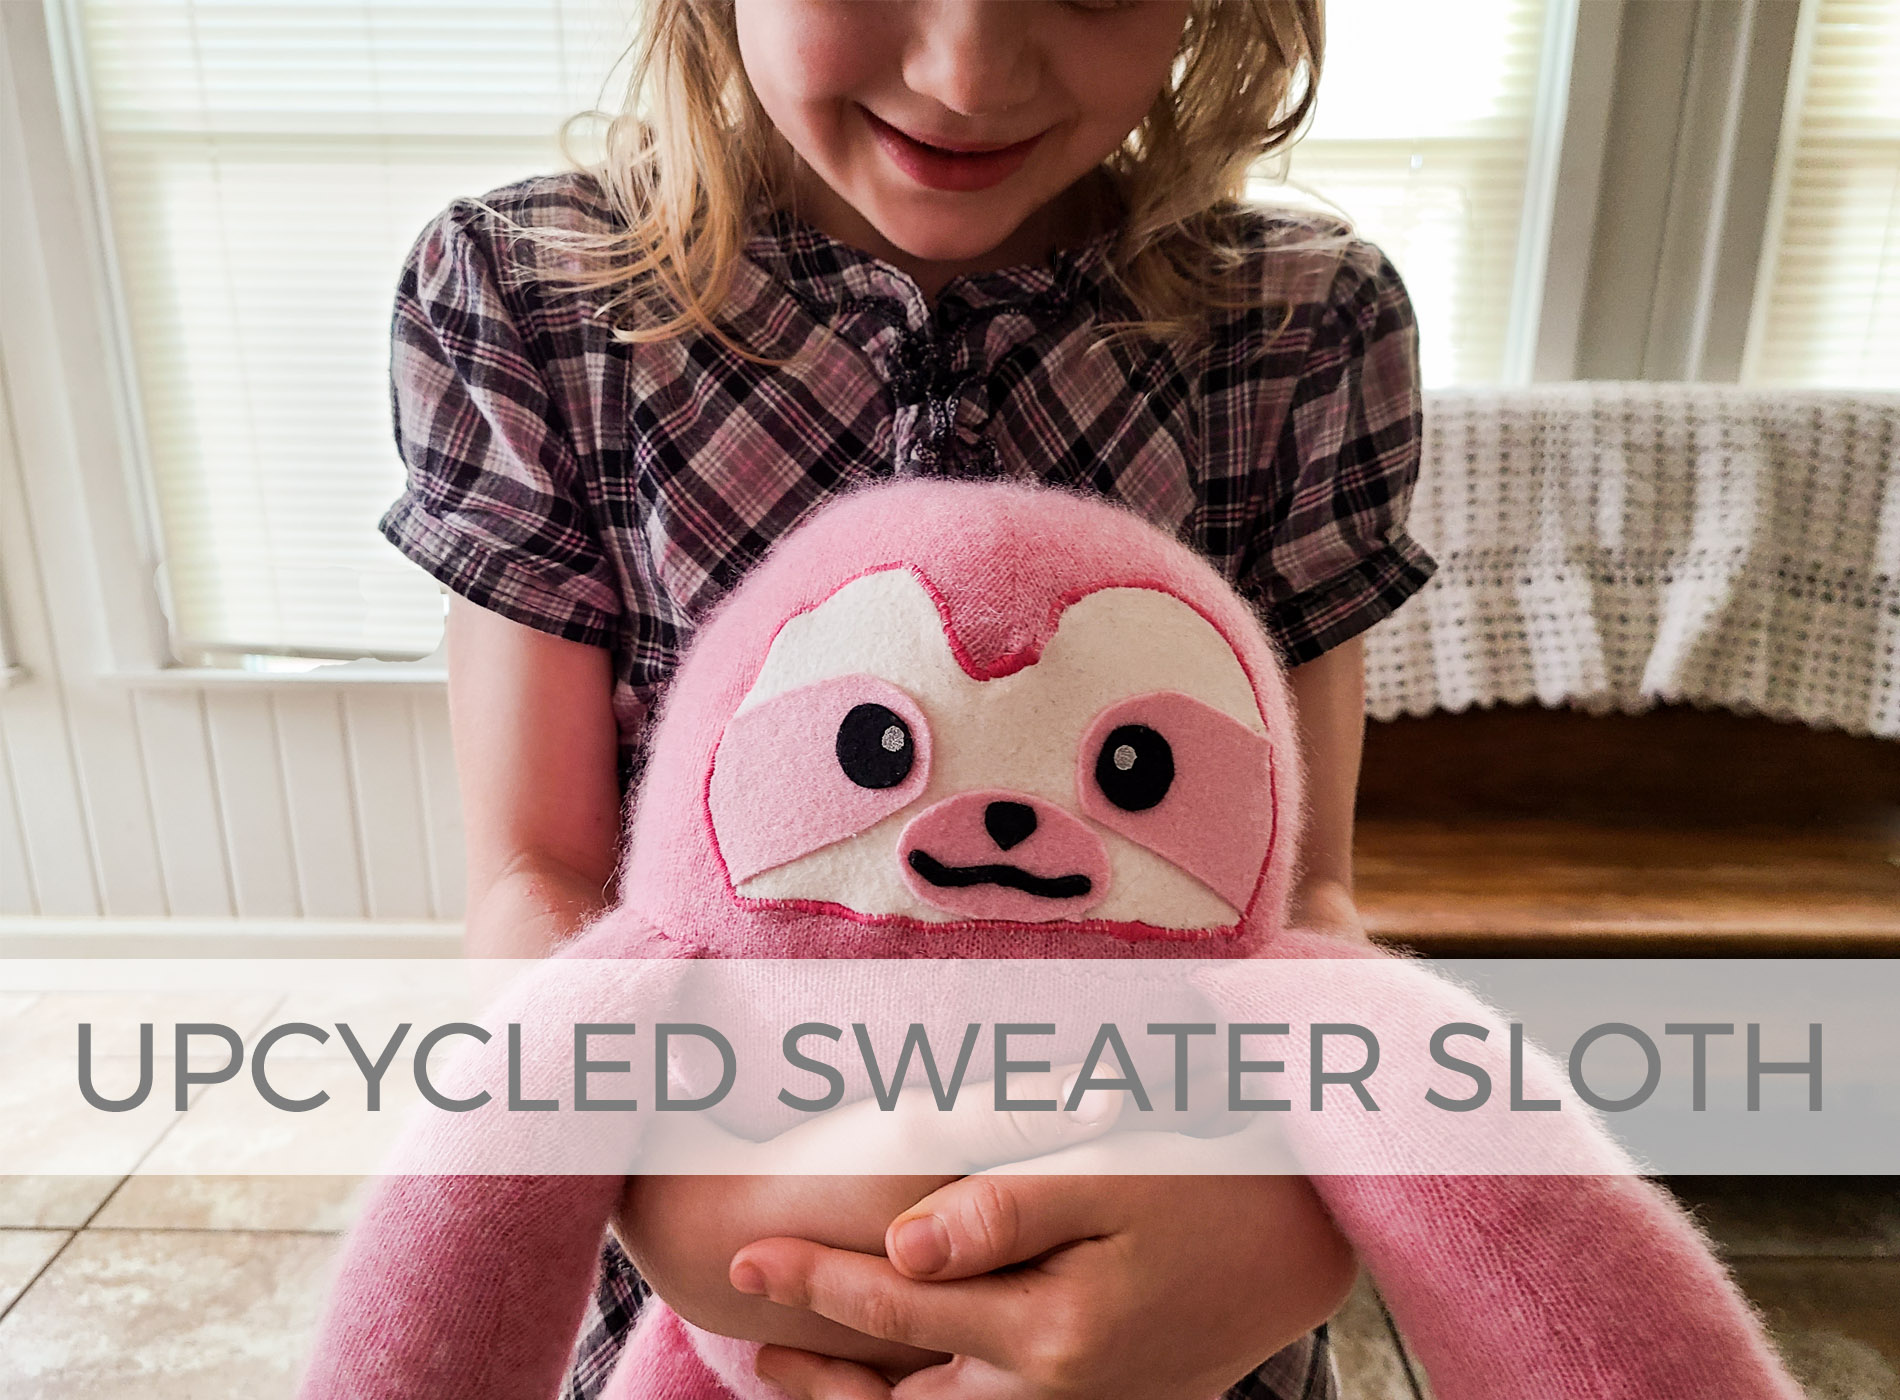 Upcycled Sweater Sloth by Larissa of Prodigal Pieces | prodigalpieces.com #prodigalpieces